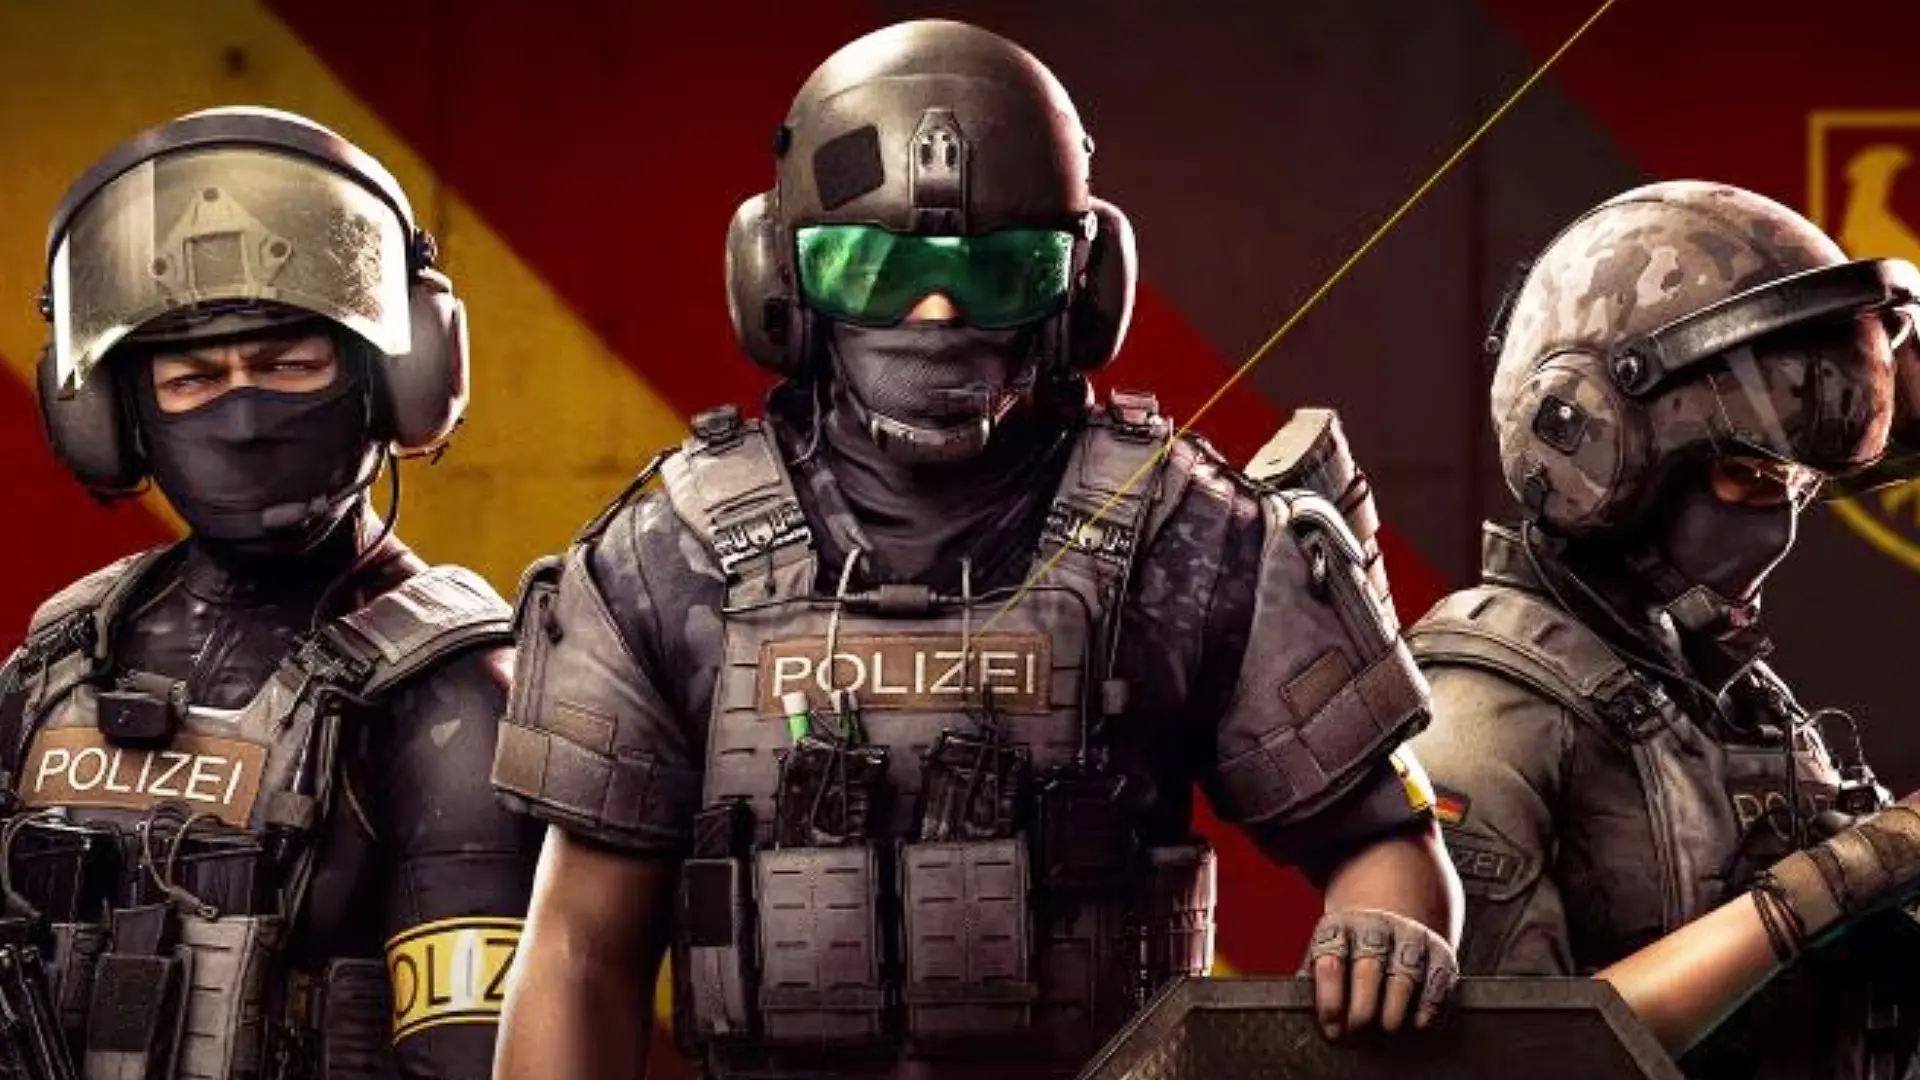 Key art for XDefiant shows three GSK 9 operators wearing heavy armor and helmets standing shoulder to shoulder while holding their various equipment.